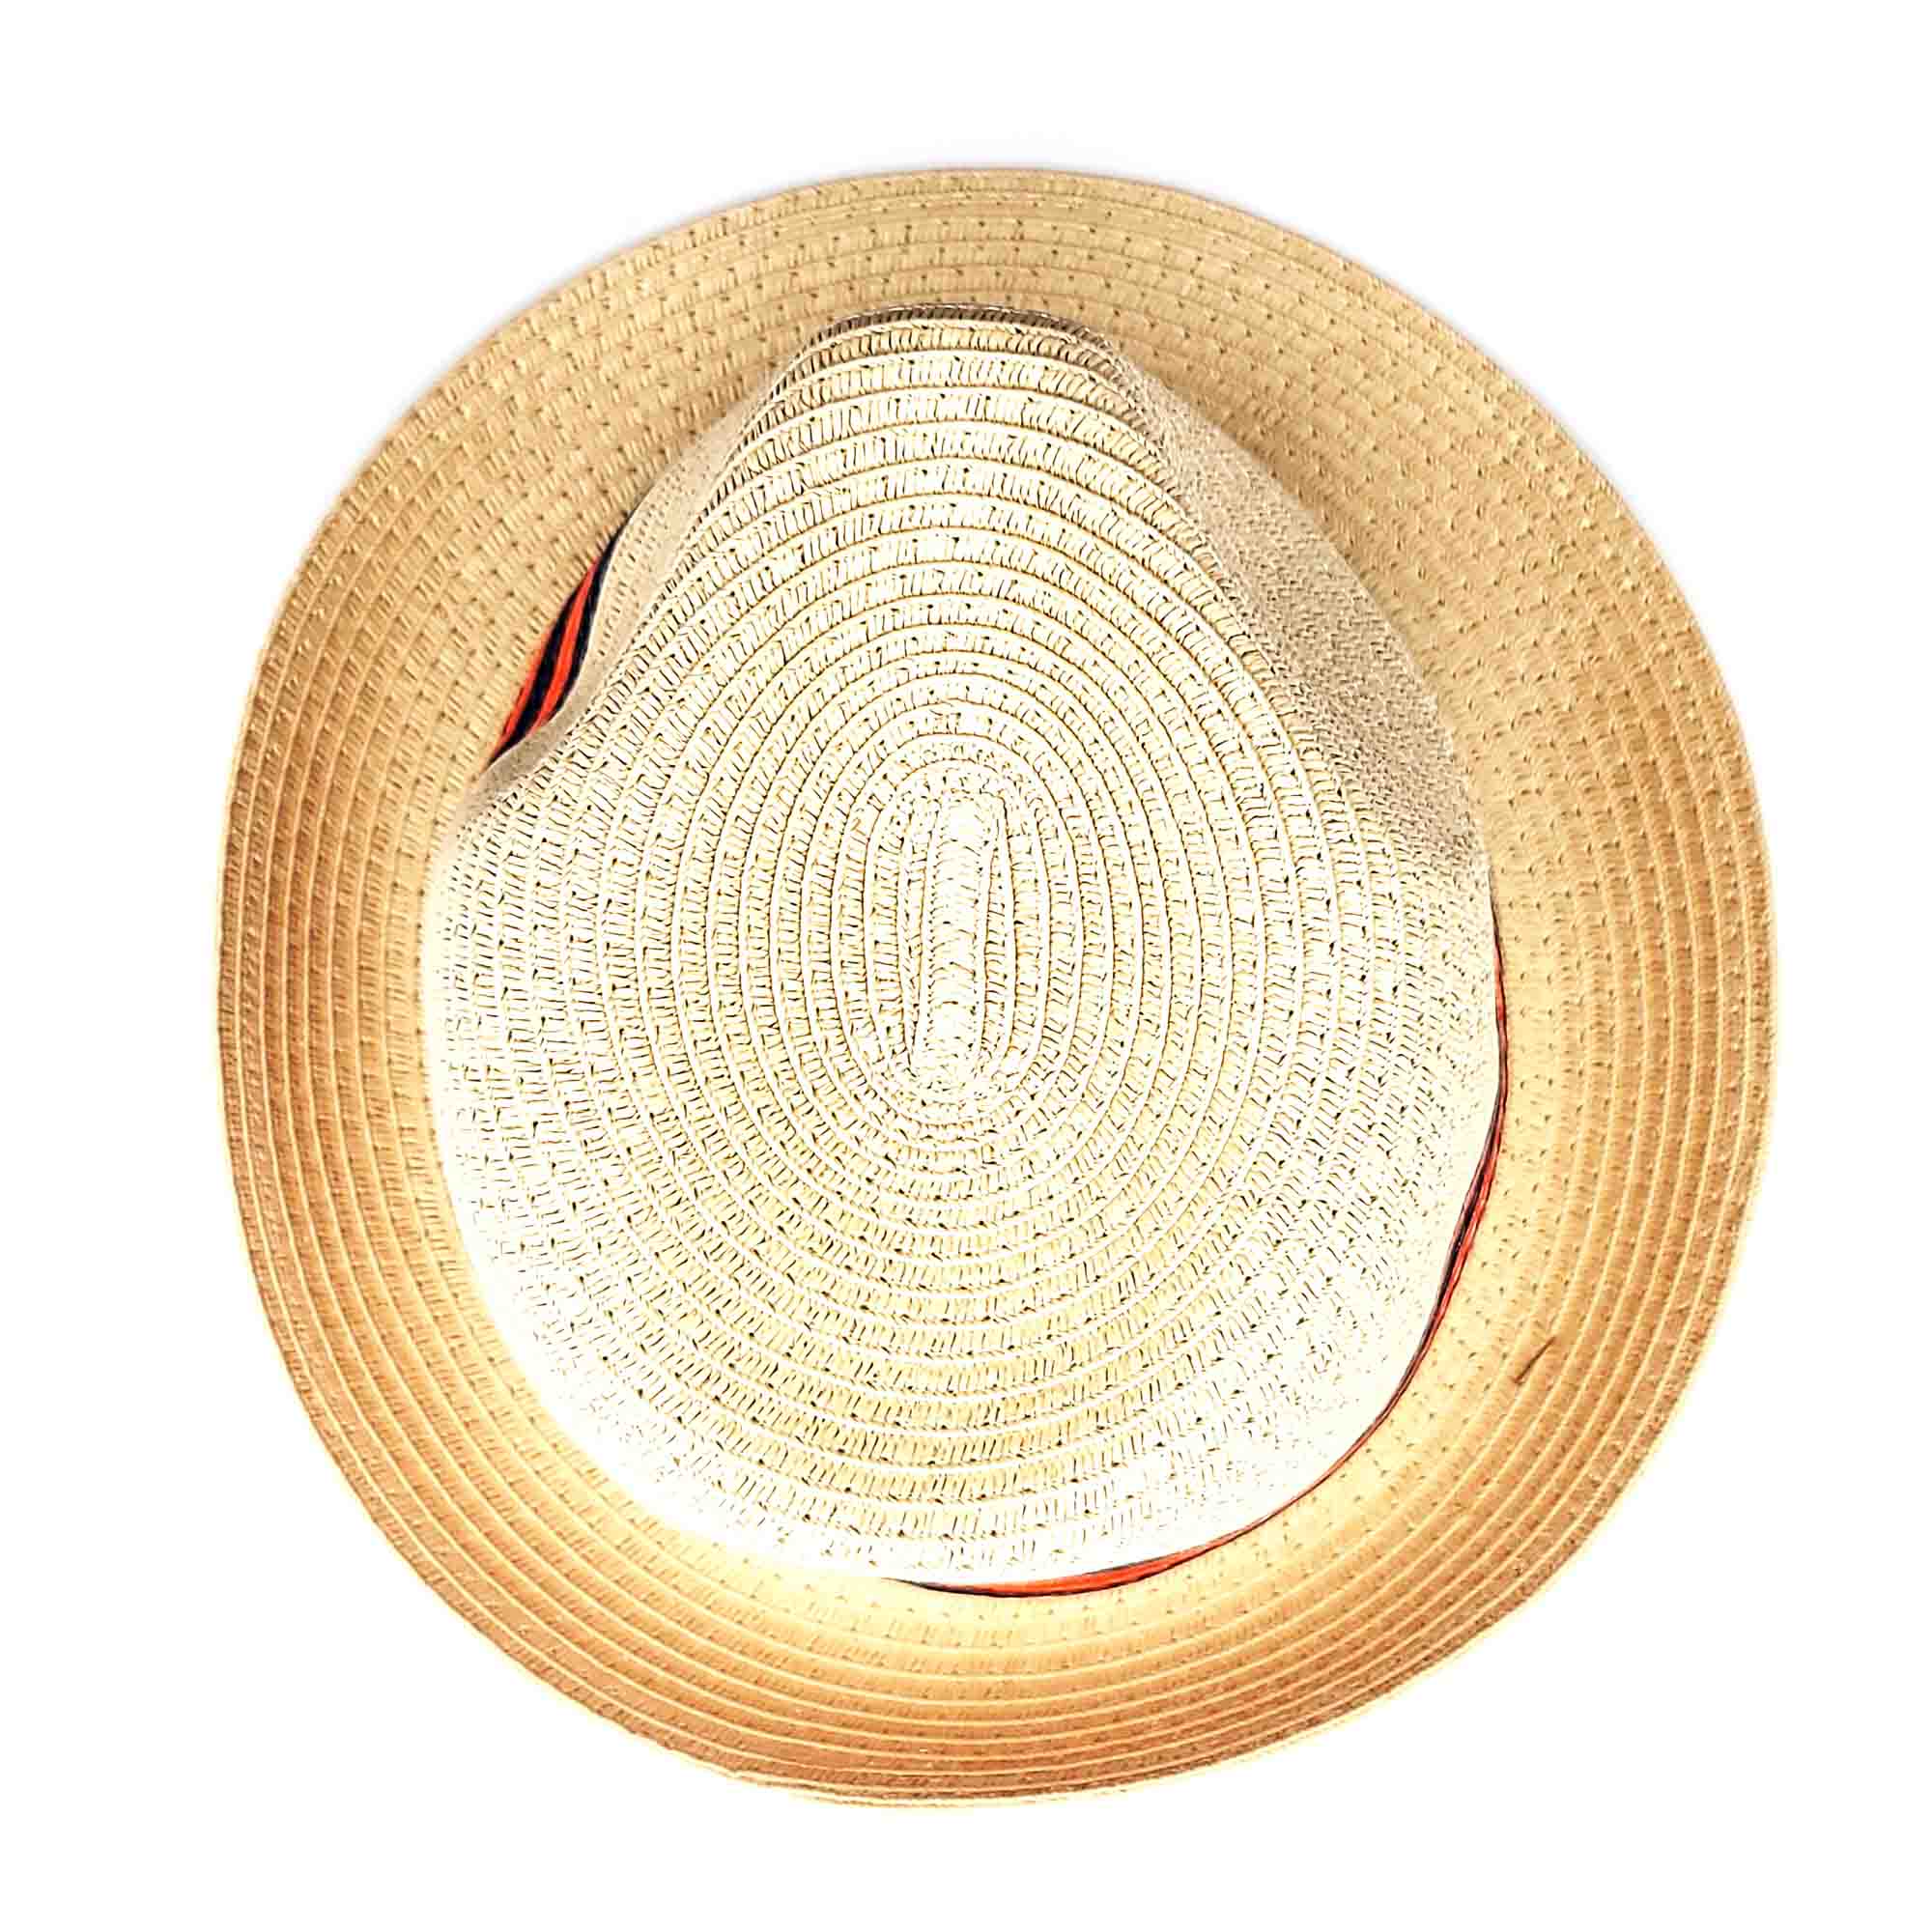 Orange and Navy Band Straw Fedora for Small Heads - Sunny Dayz™ Fedora Hat Sun N Sand Hats    